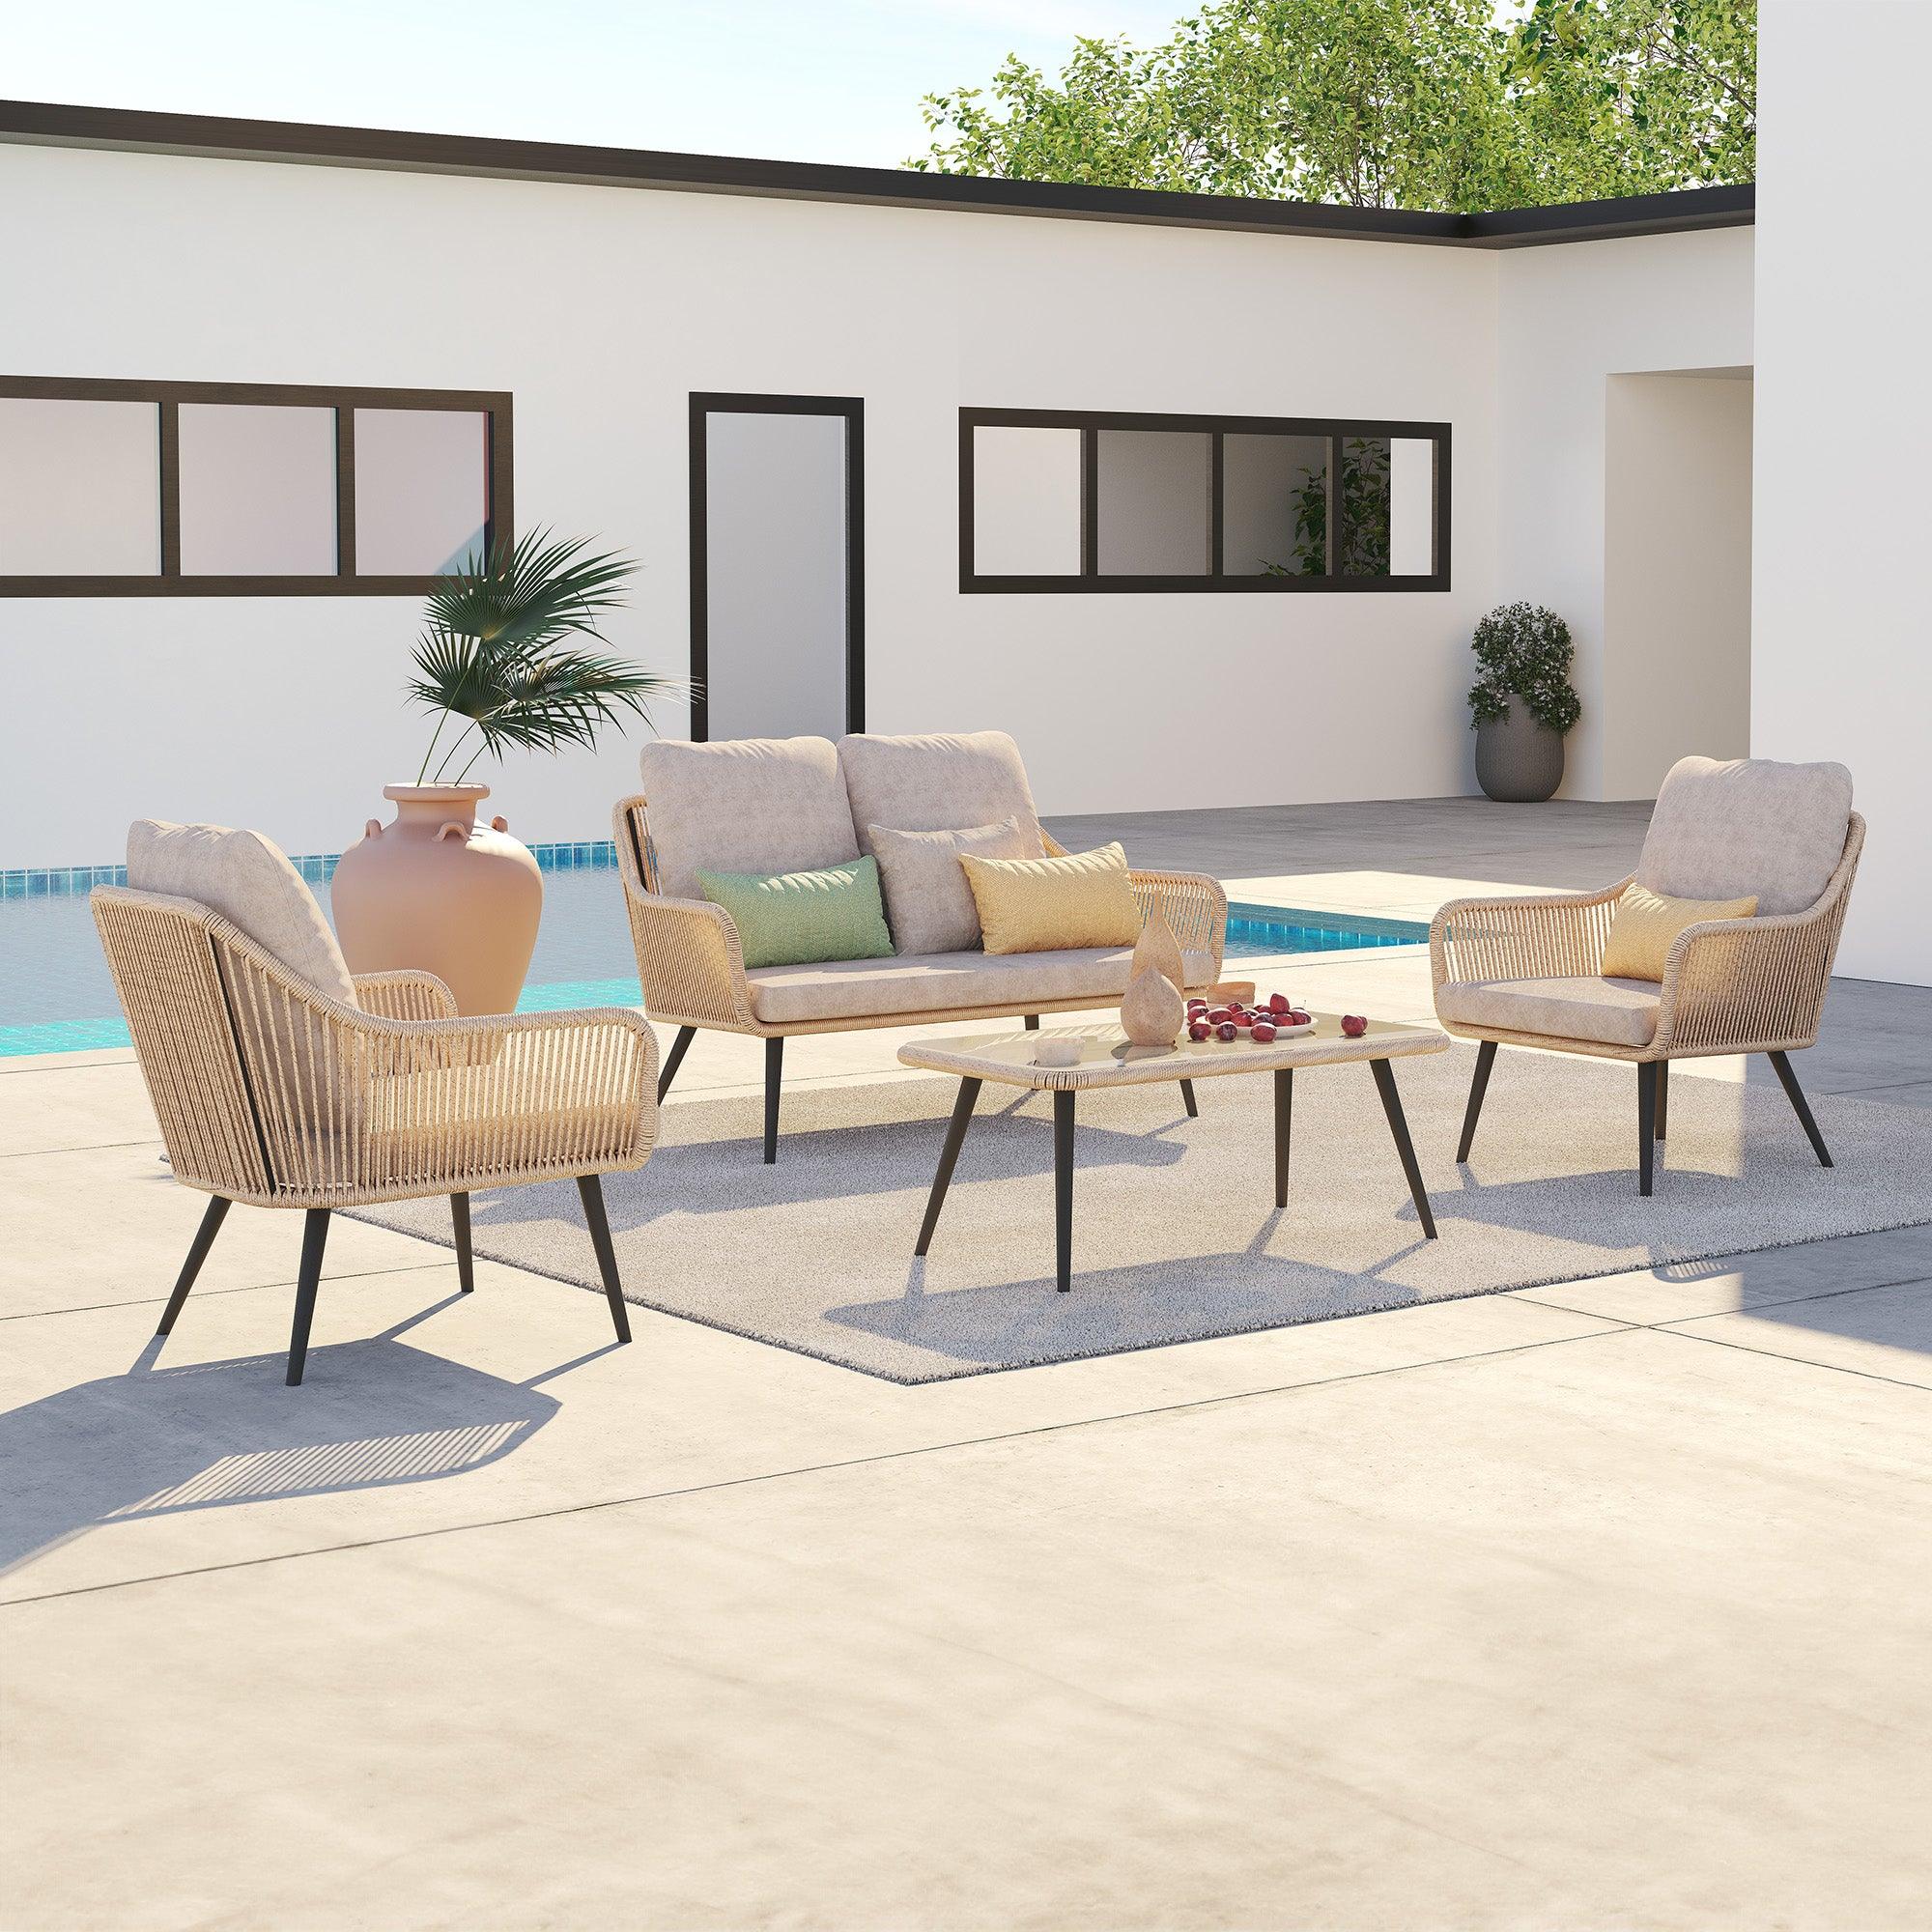 Hallerbos Modern Wicker Outdoor Furniture, 4-Piece outdoor sofa set with beige cushions, steel frame and natural twisted rattan design, outdoors - Jardina Furniture#Color_Natural